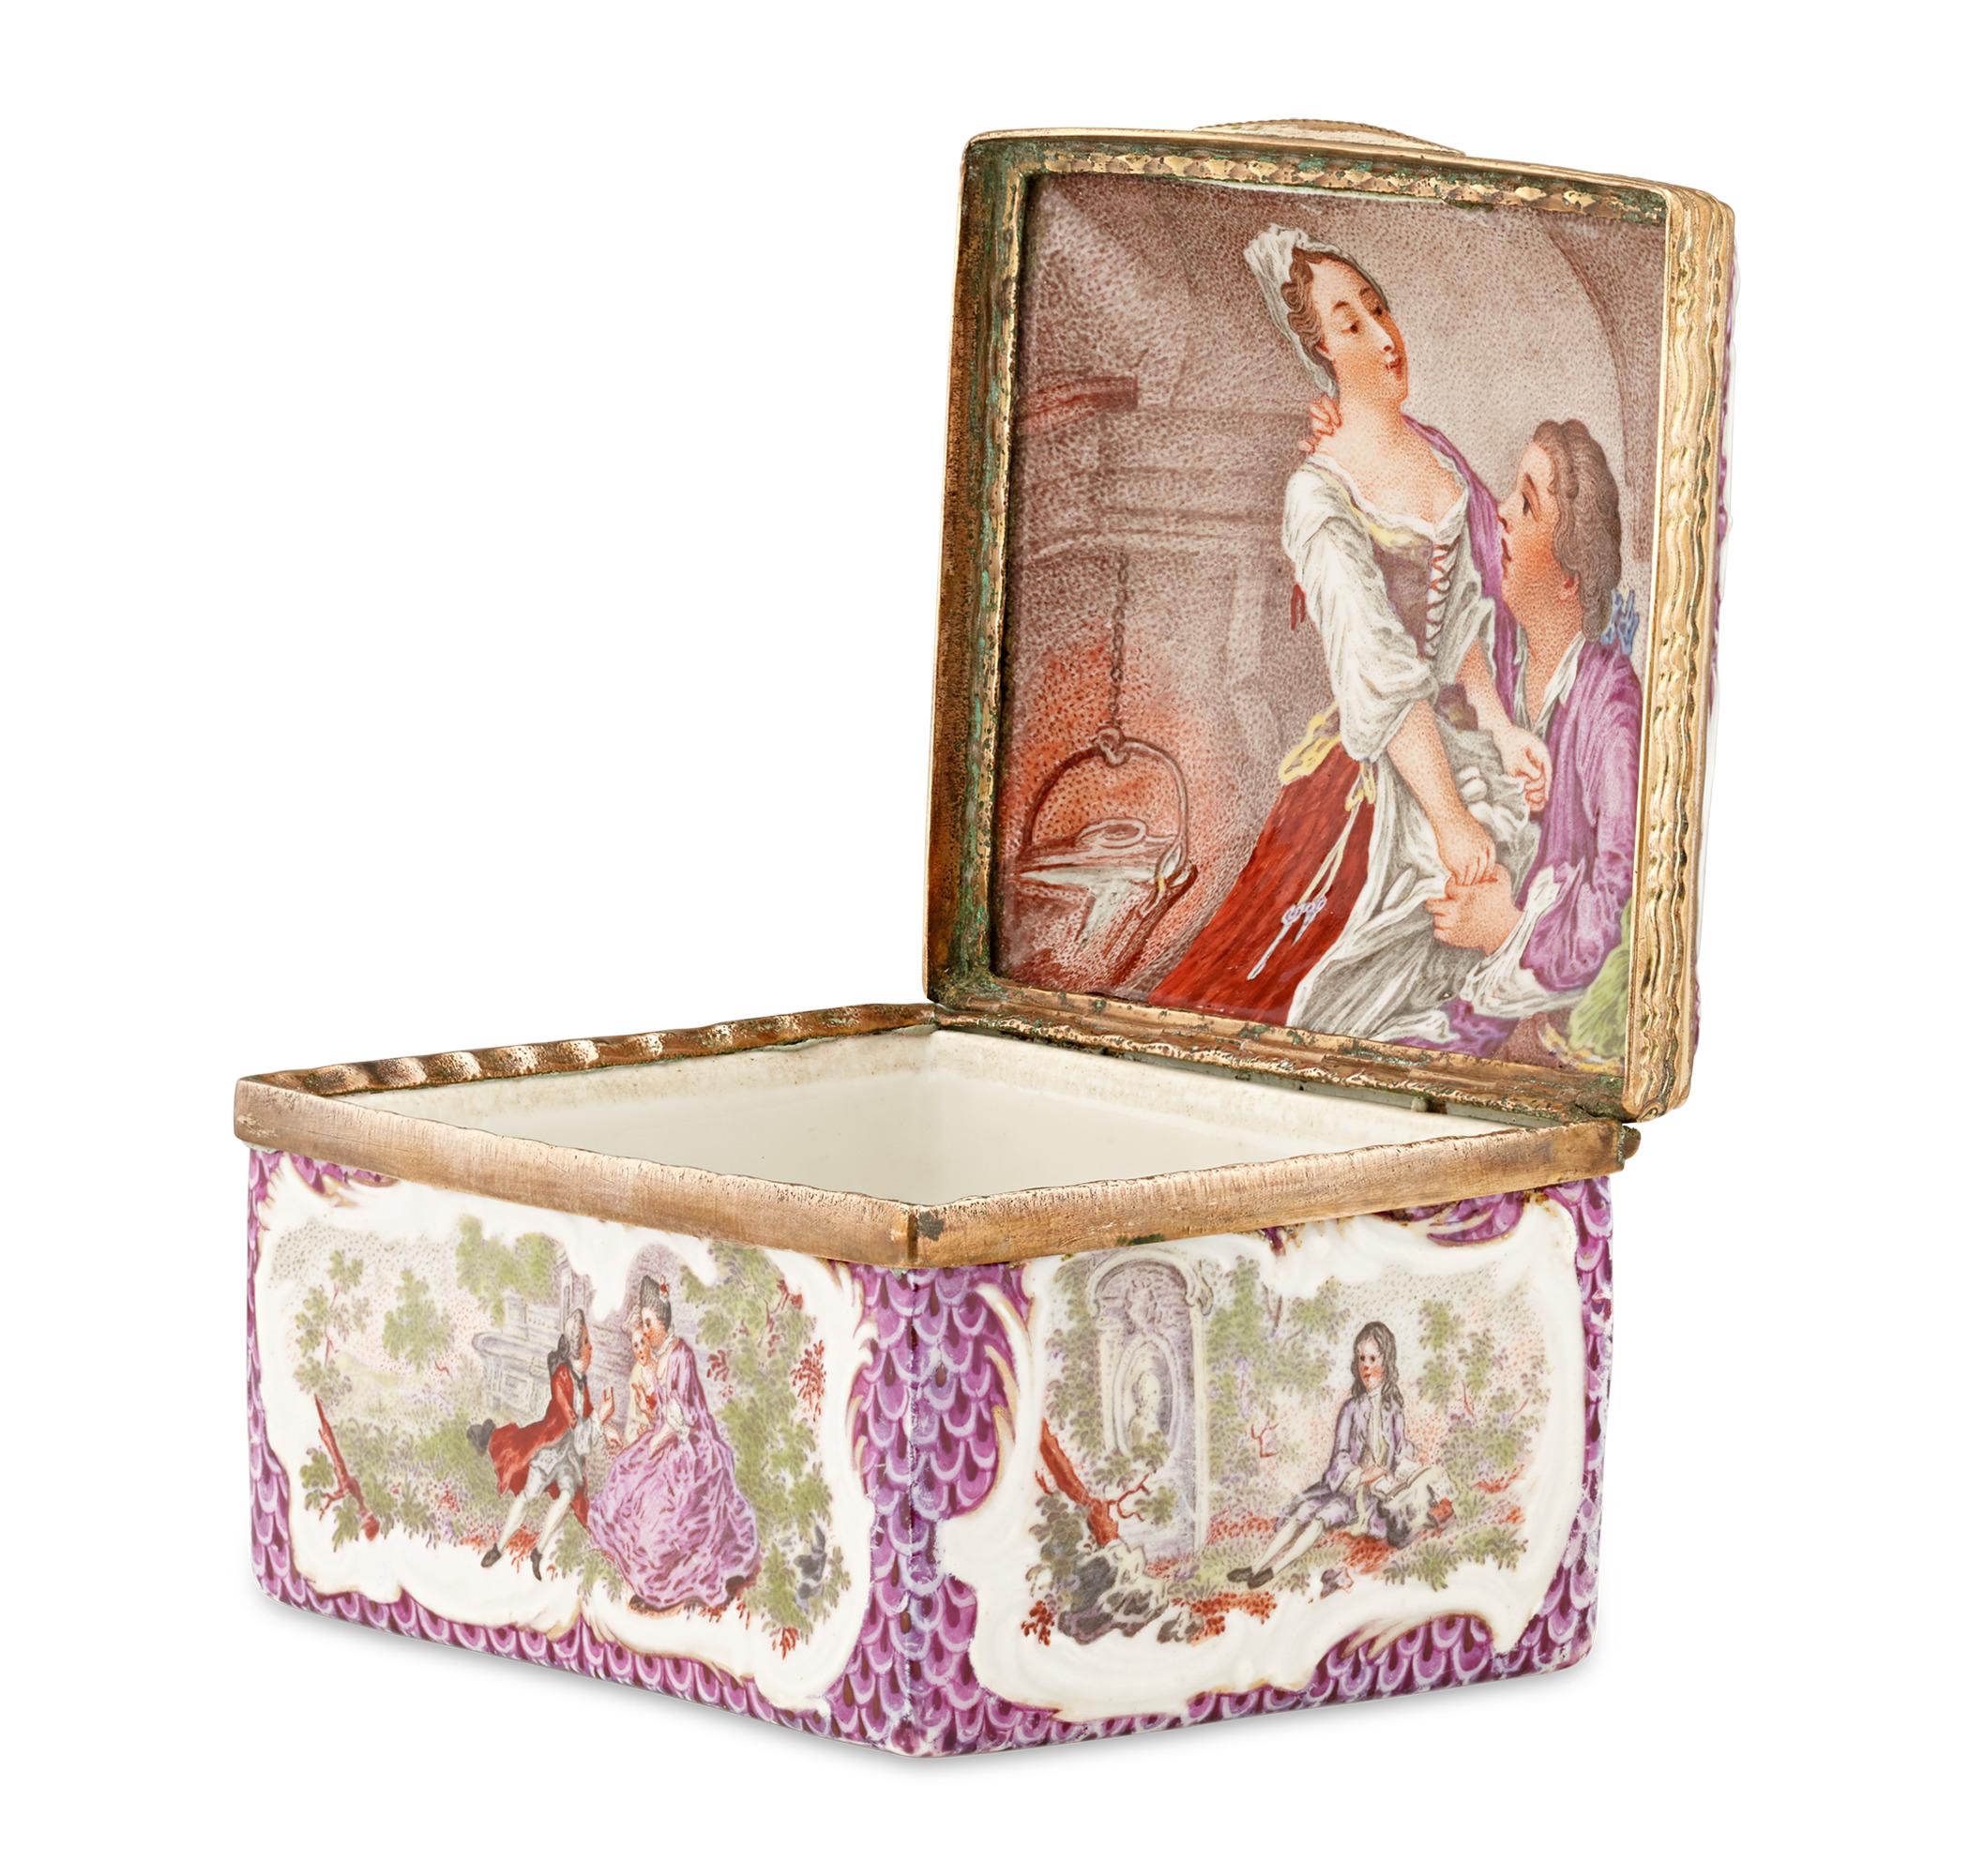 Incredible hand-painted scenes inspired by Rococo master Antoine Watteau cover this magnificent Meissen porcelain box. Displaying romantic courtship scenes on each side, the casket is an exceptional example of the luxury firm's output. Meissen is